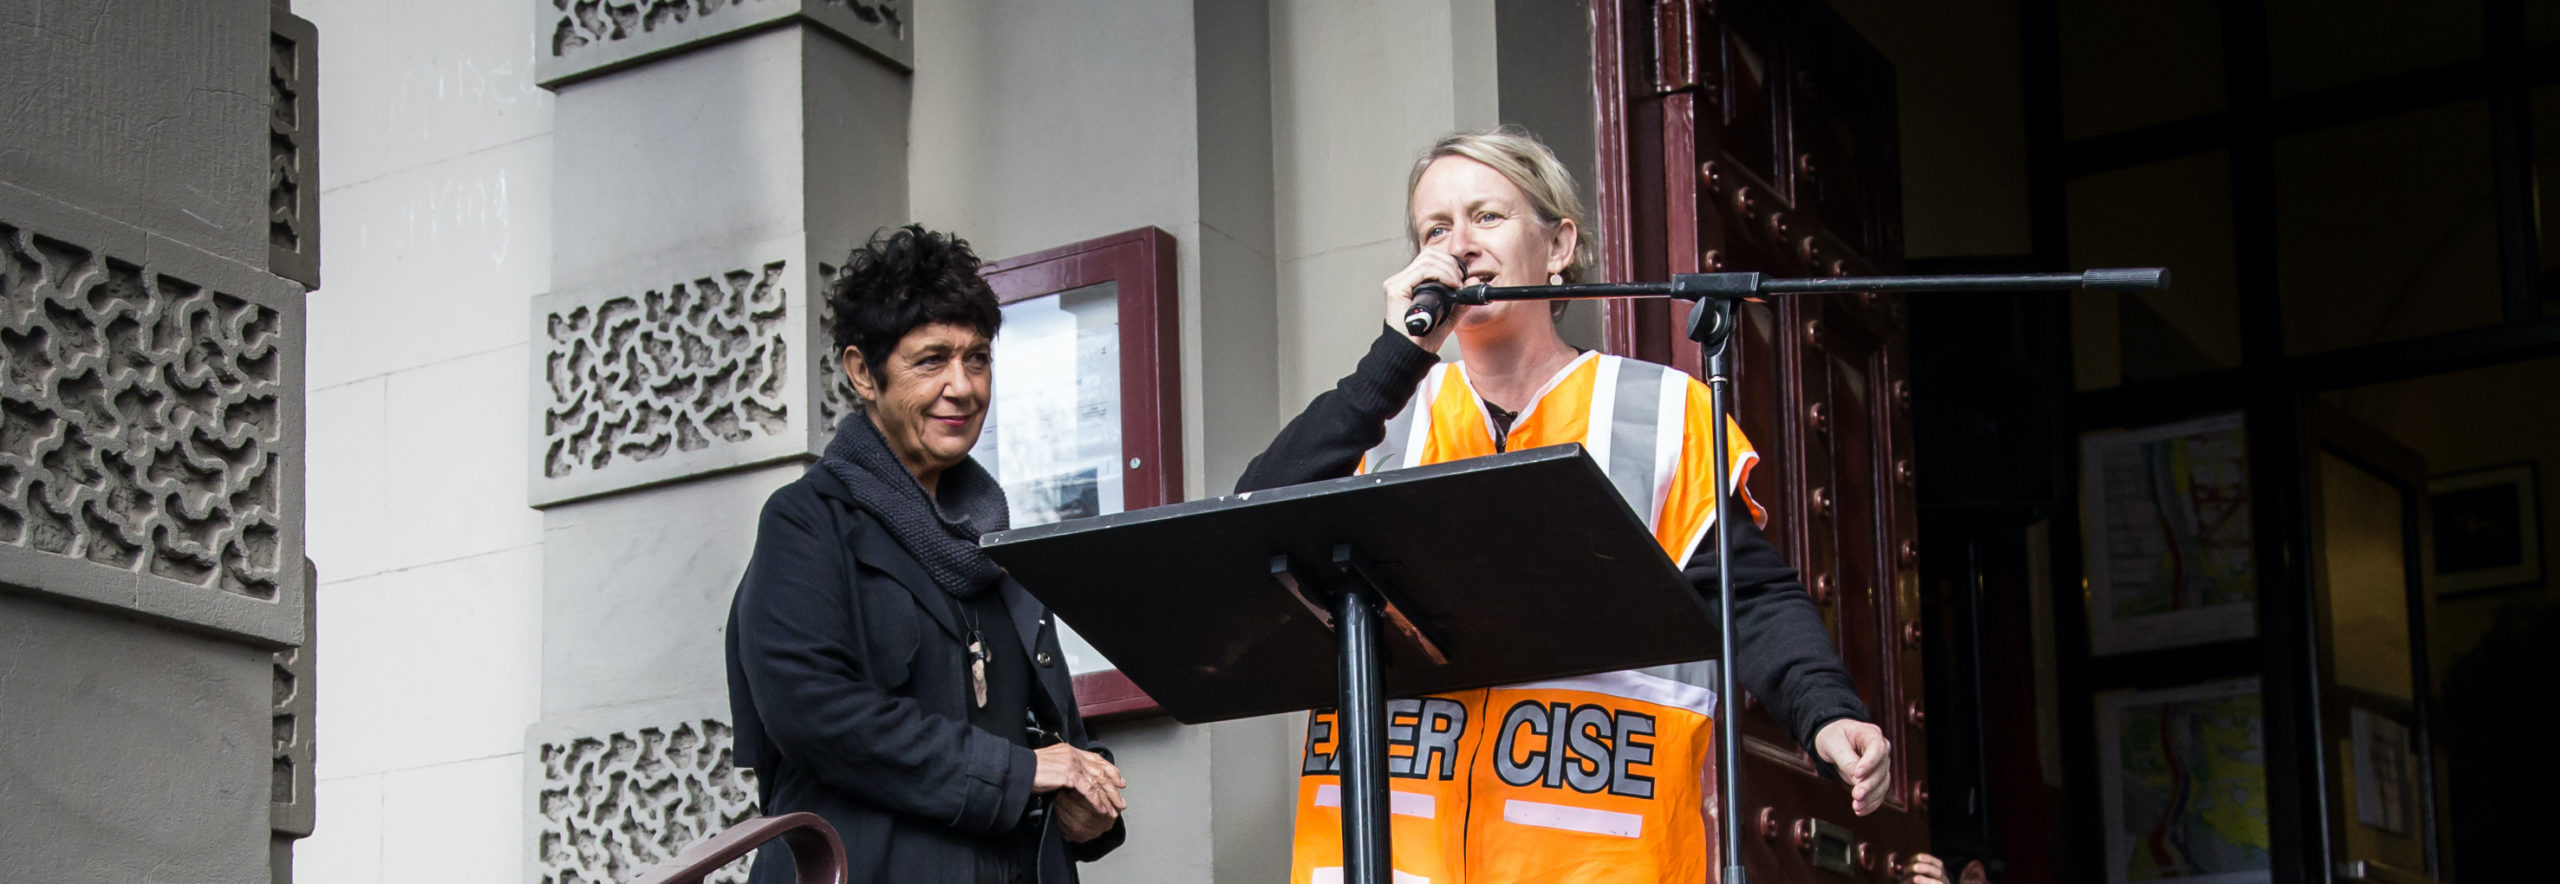 Introduction from an IntermediaryBoon Wurrung Elder N’arweet Carolyn Briggs and Angharad Wynne-Jones during Refuge 2016: Flood welcome, Photo by Bryony Jackson.